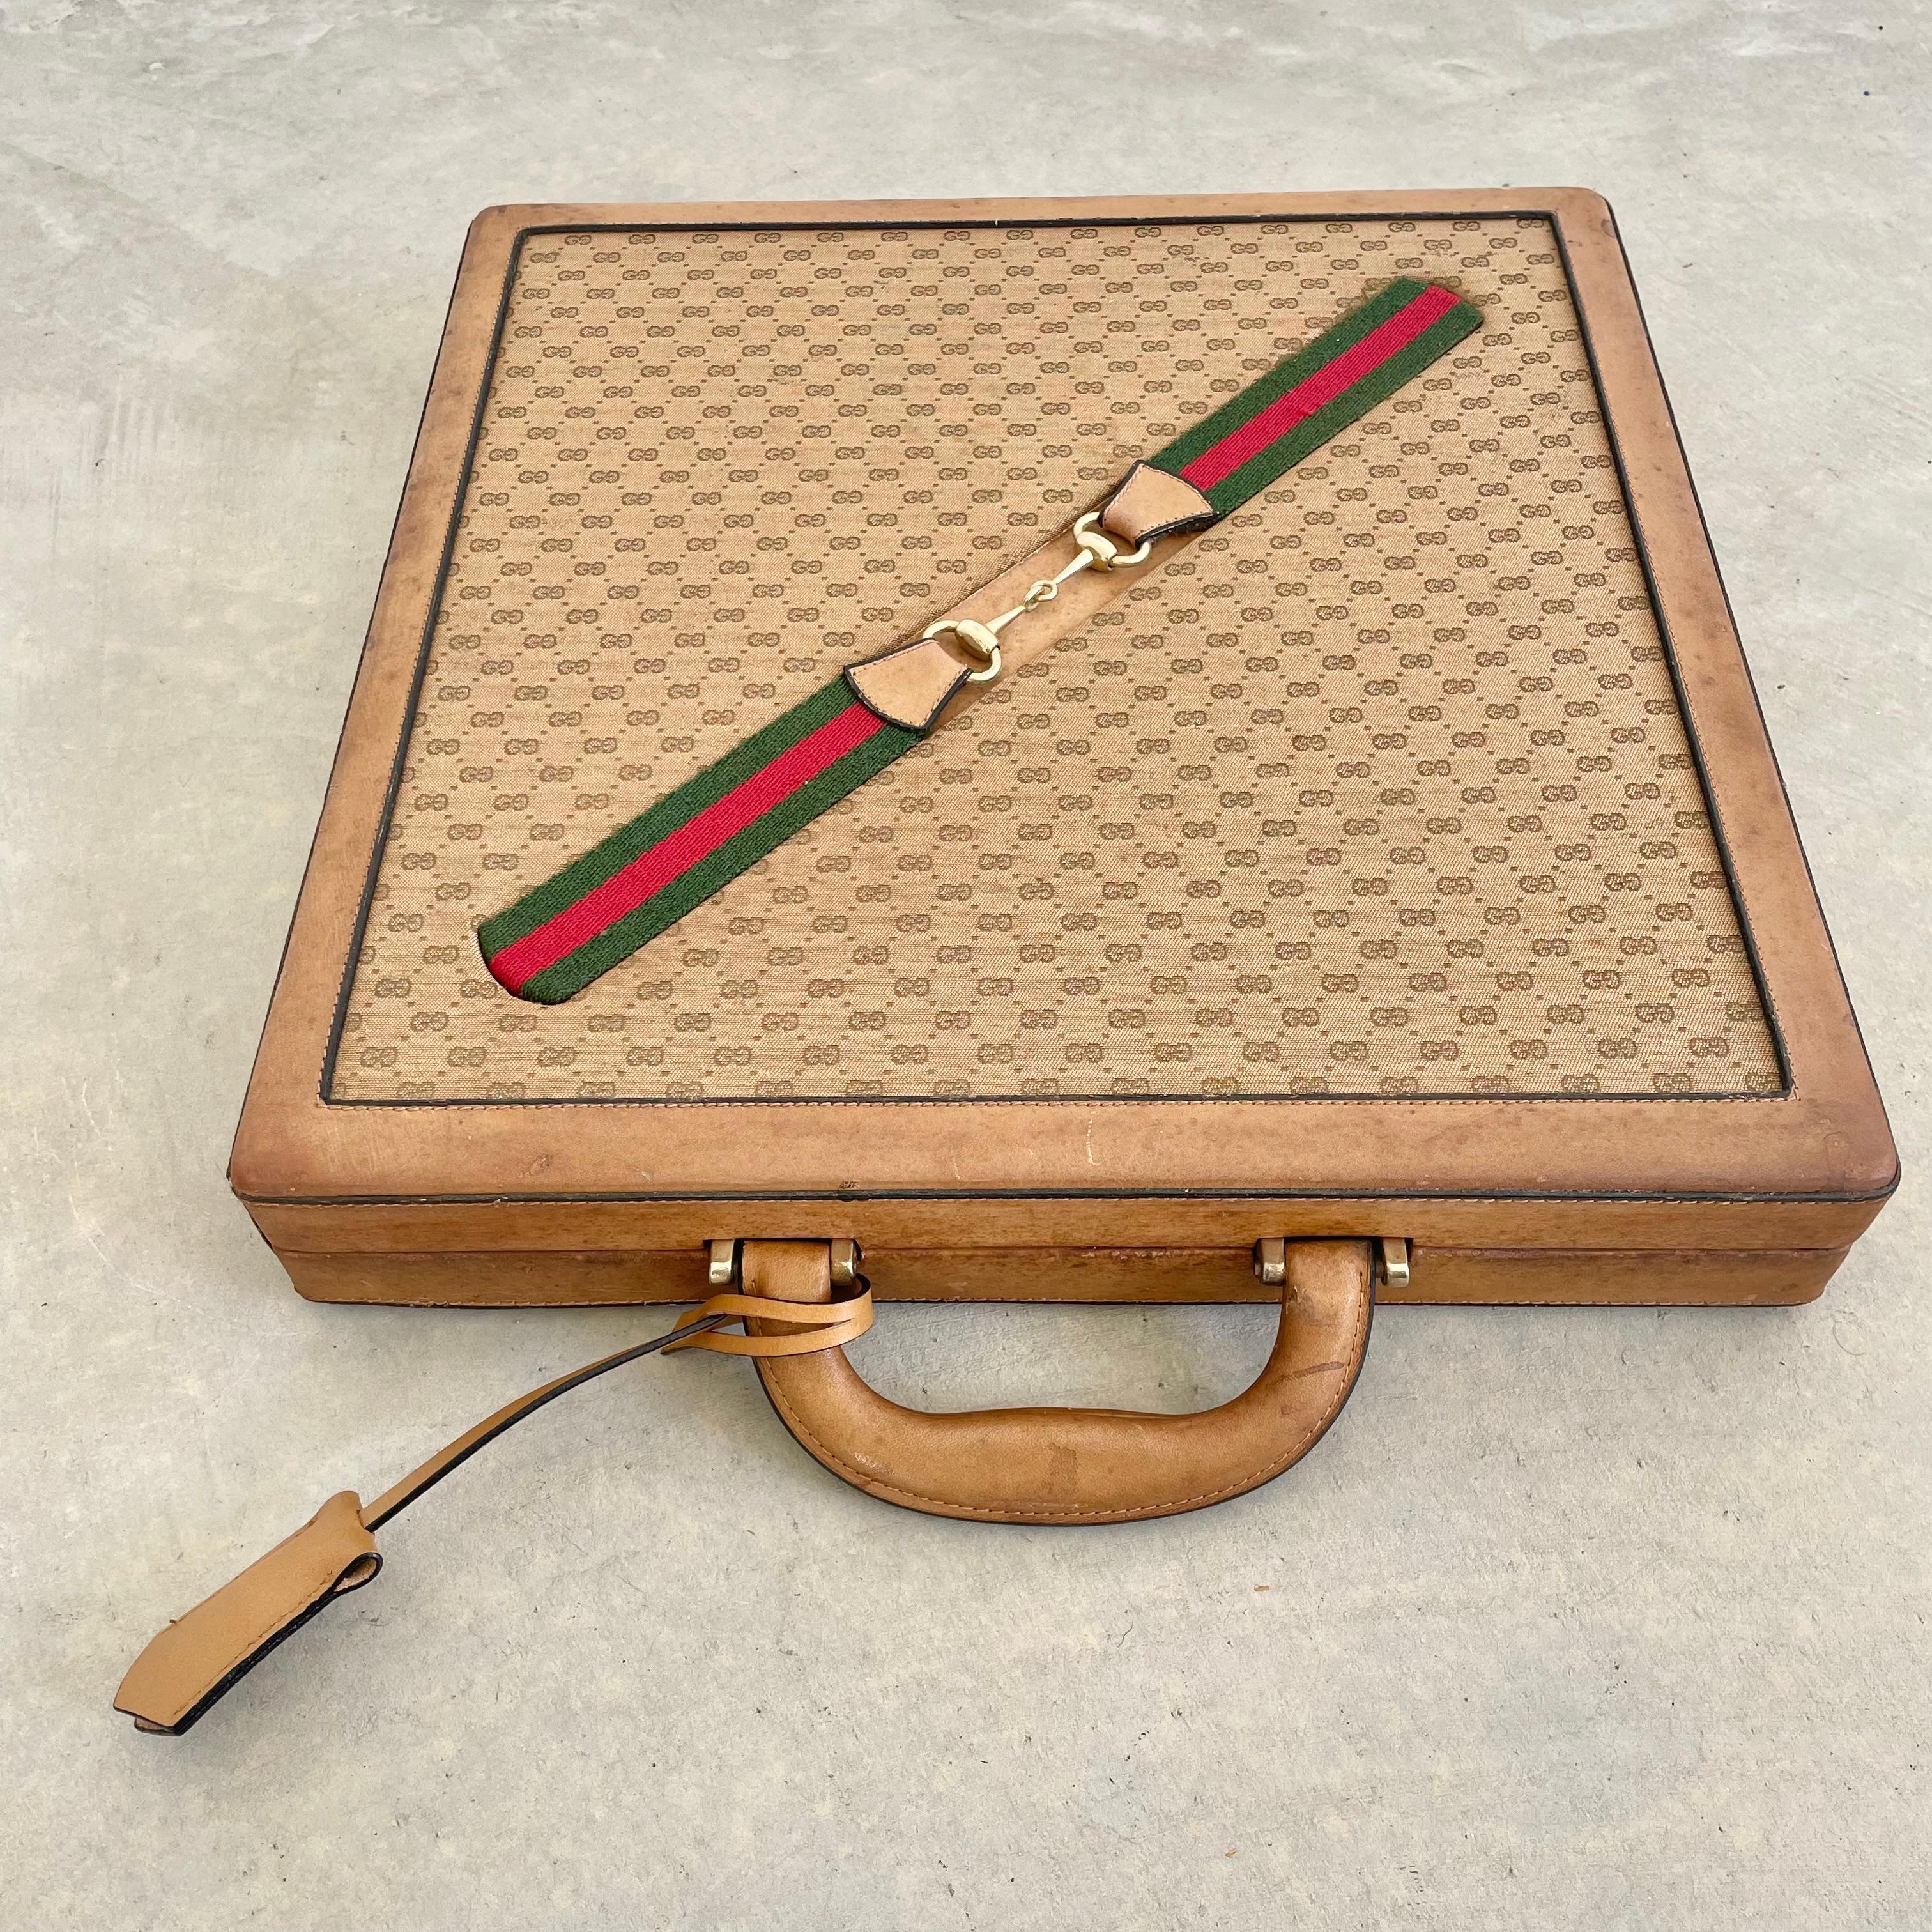 Vintage portable Gucci leather game case with chess, checkers and backgammon. Wood framed case wrapped in an elegant canvas with leather accents. Canvas features a repeating sequence of the Gucci interlocking 